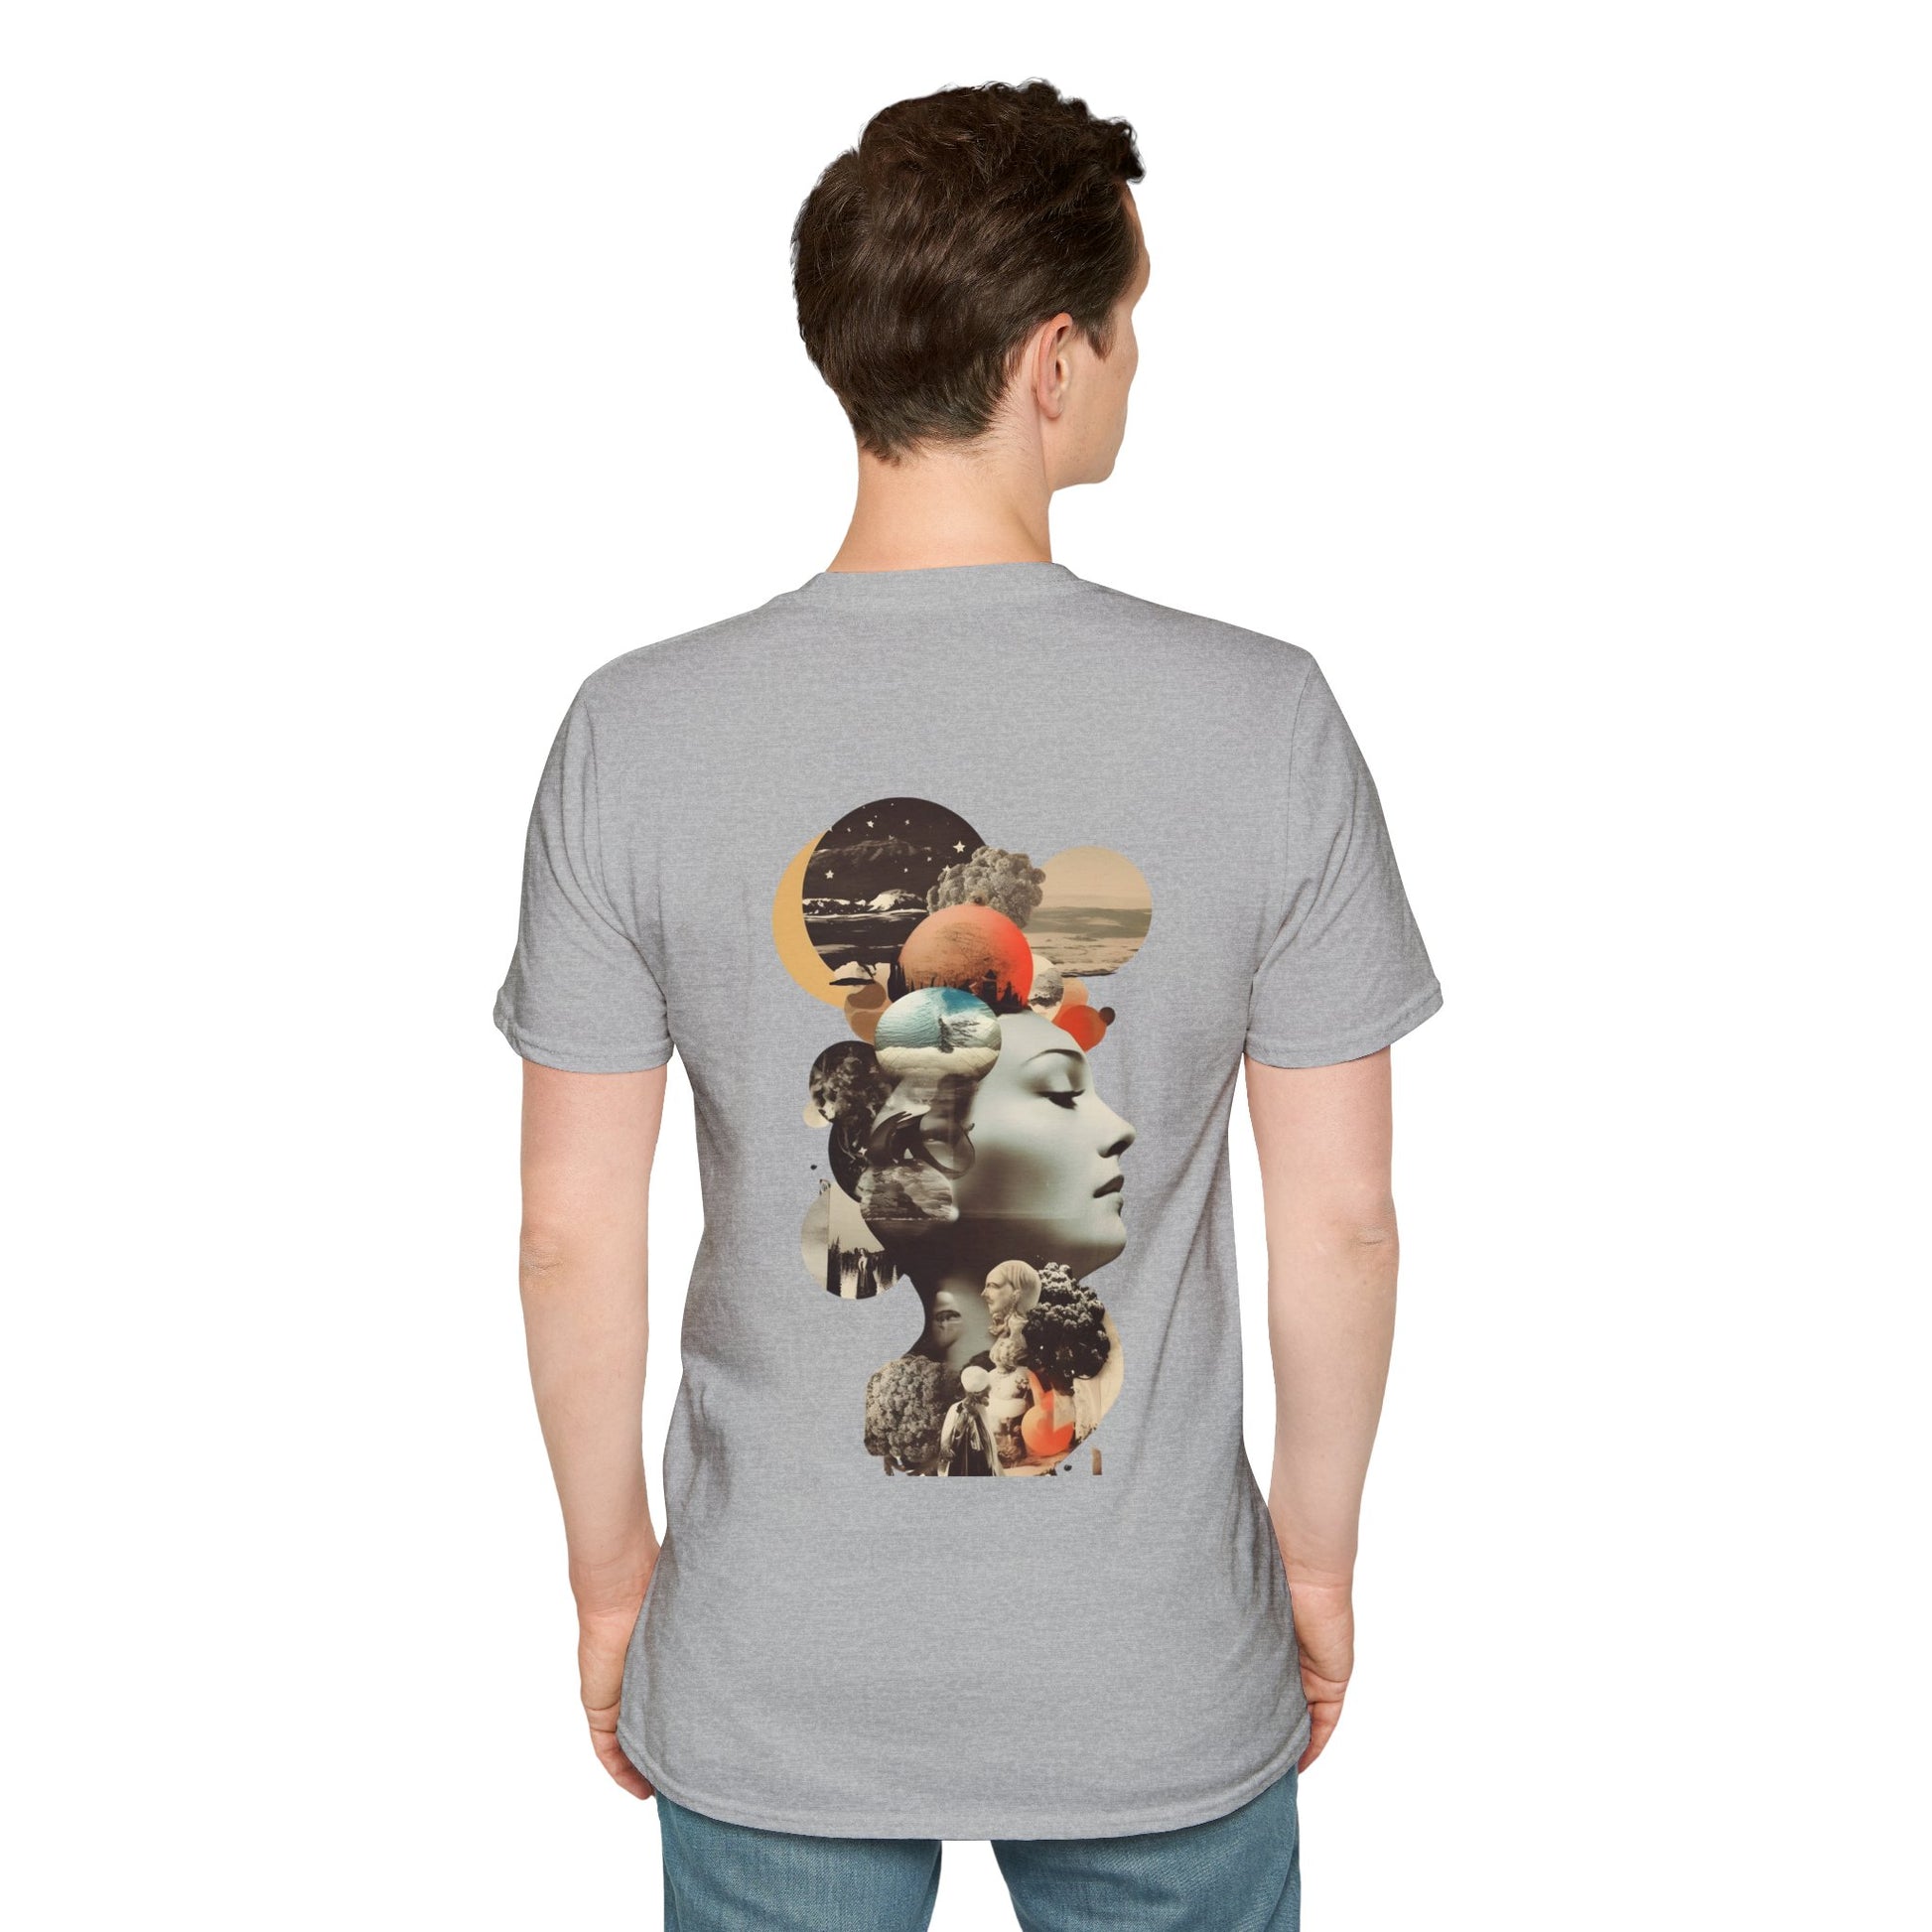 LIght Grey T-shirt with a collage of a mysterious figure surrounded by butterflies and roses